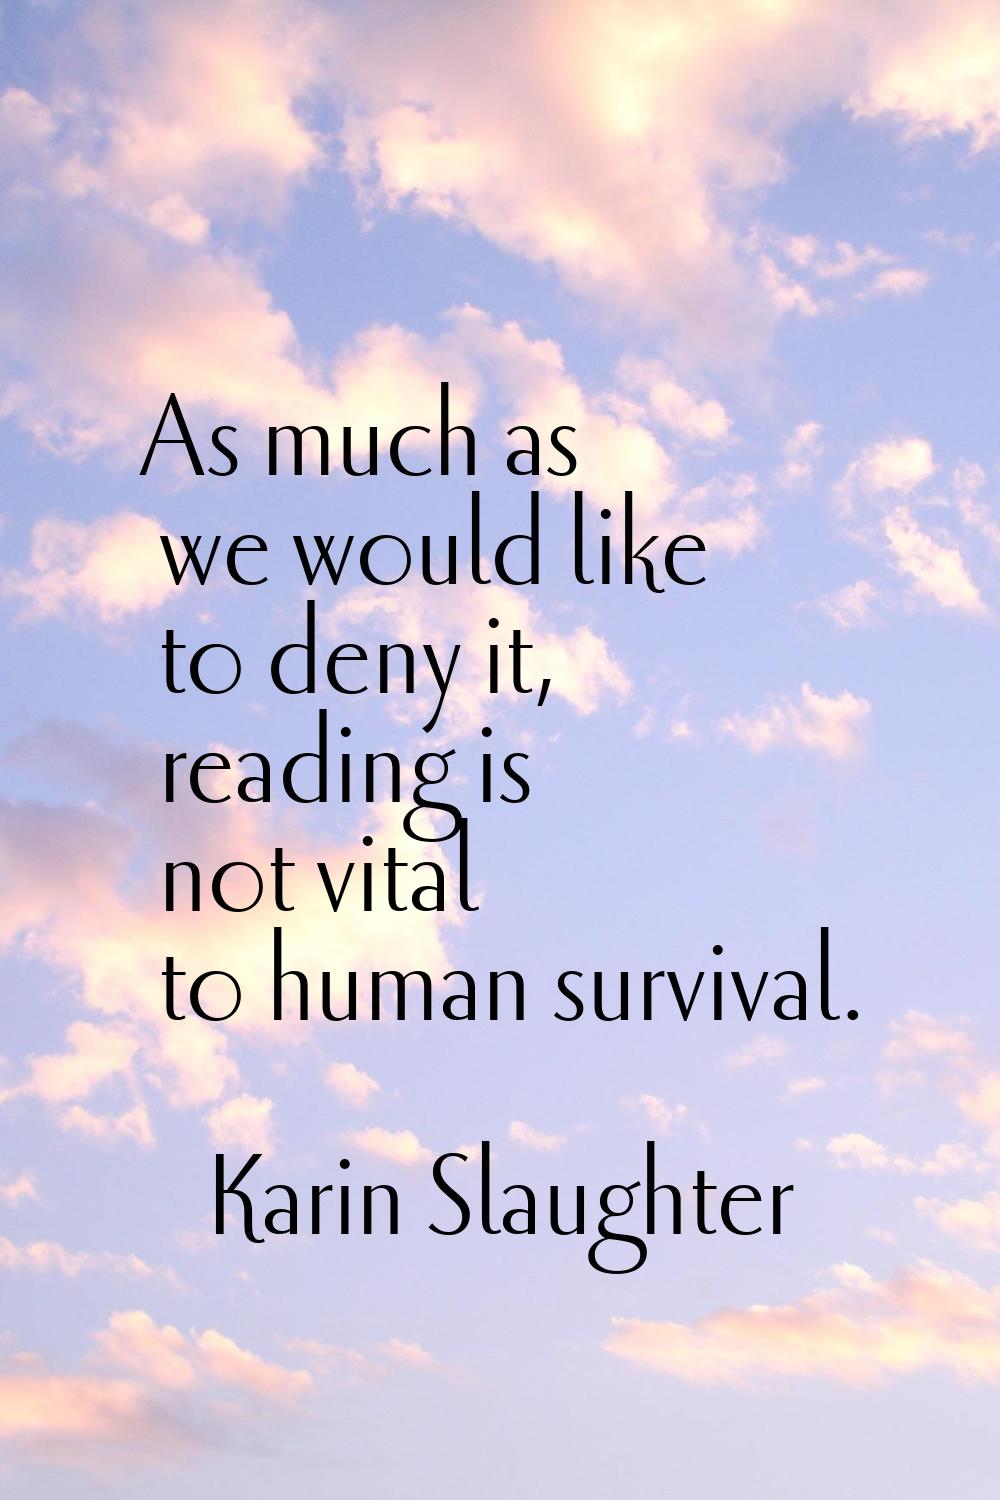 As much as we would like to deny it, reading is not vital to human survival.